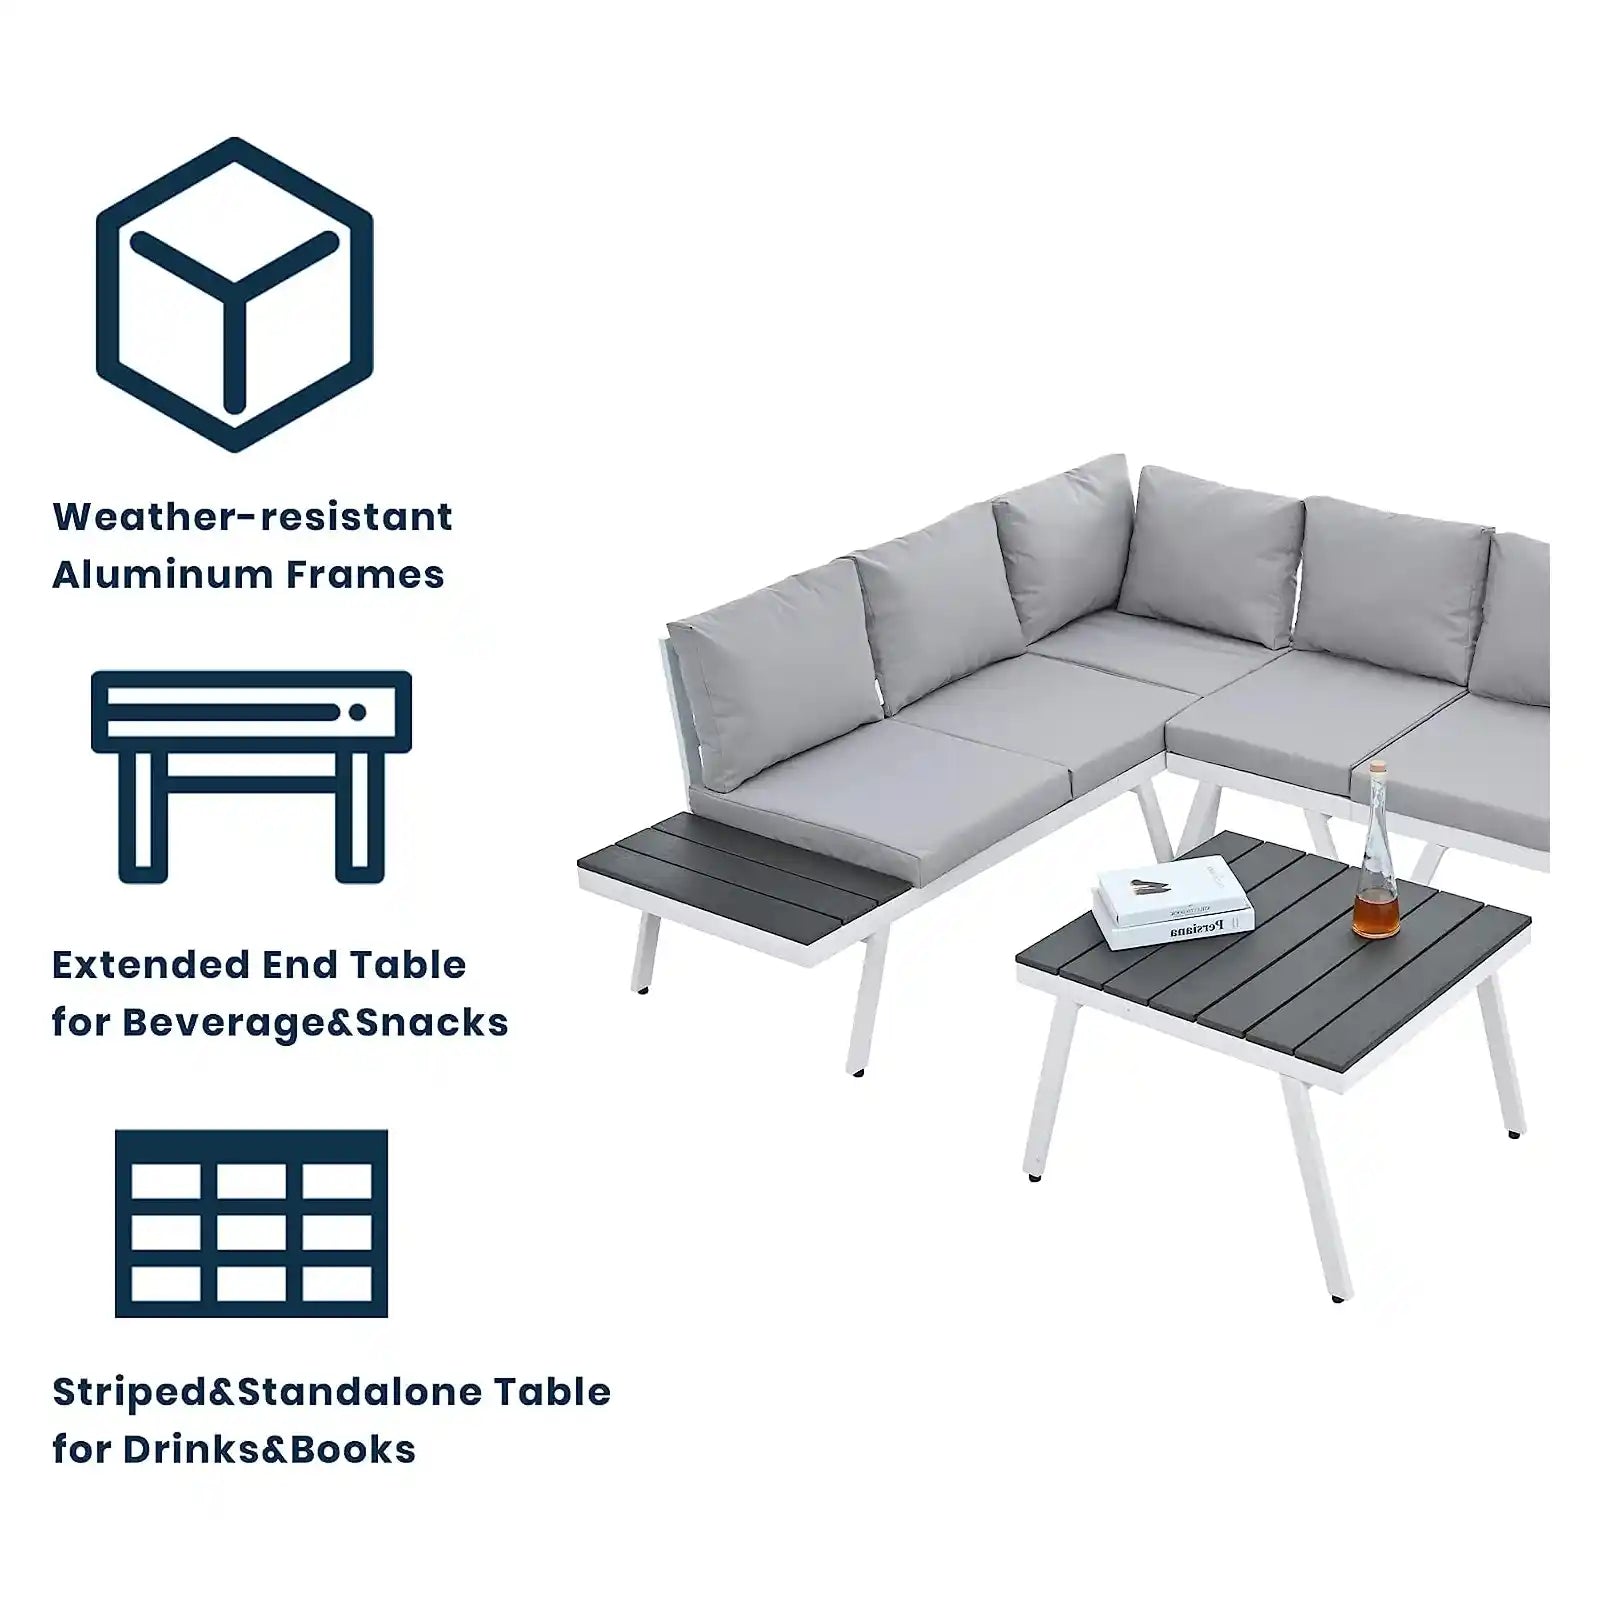 Industrial 5-Piece Aluminum Outdoor Patio Furniture Set, Modern Garden Sectional Sofa Set with End Tables, Coffee Table and Furniture Clips for Backyard